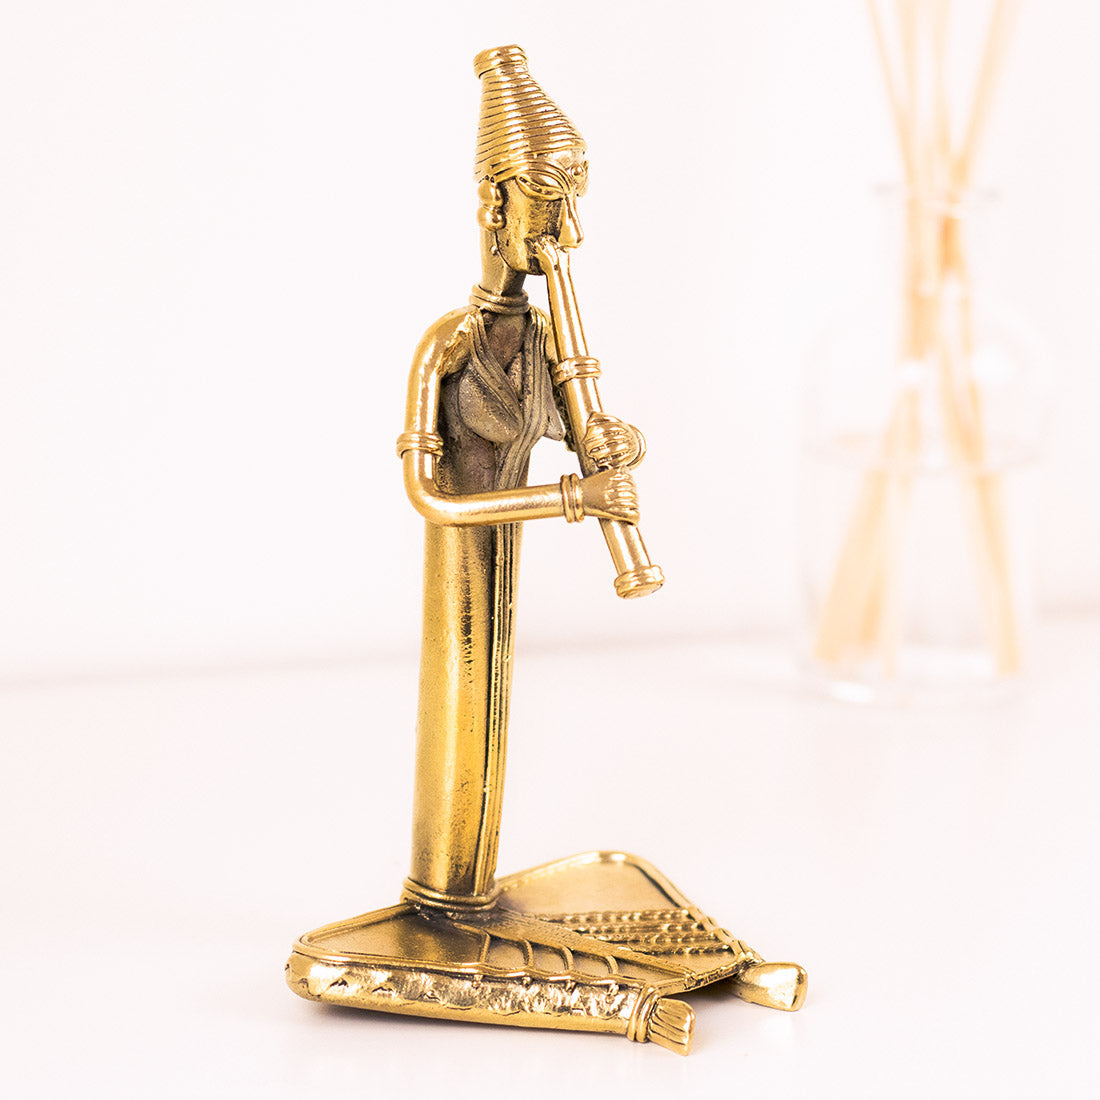 Brass Figurine of a Musician Playing the Flute